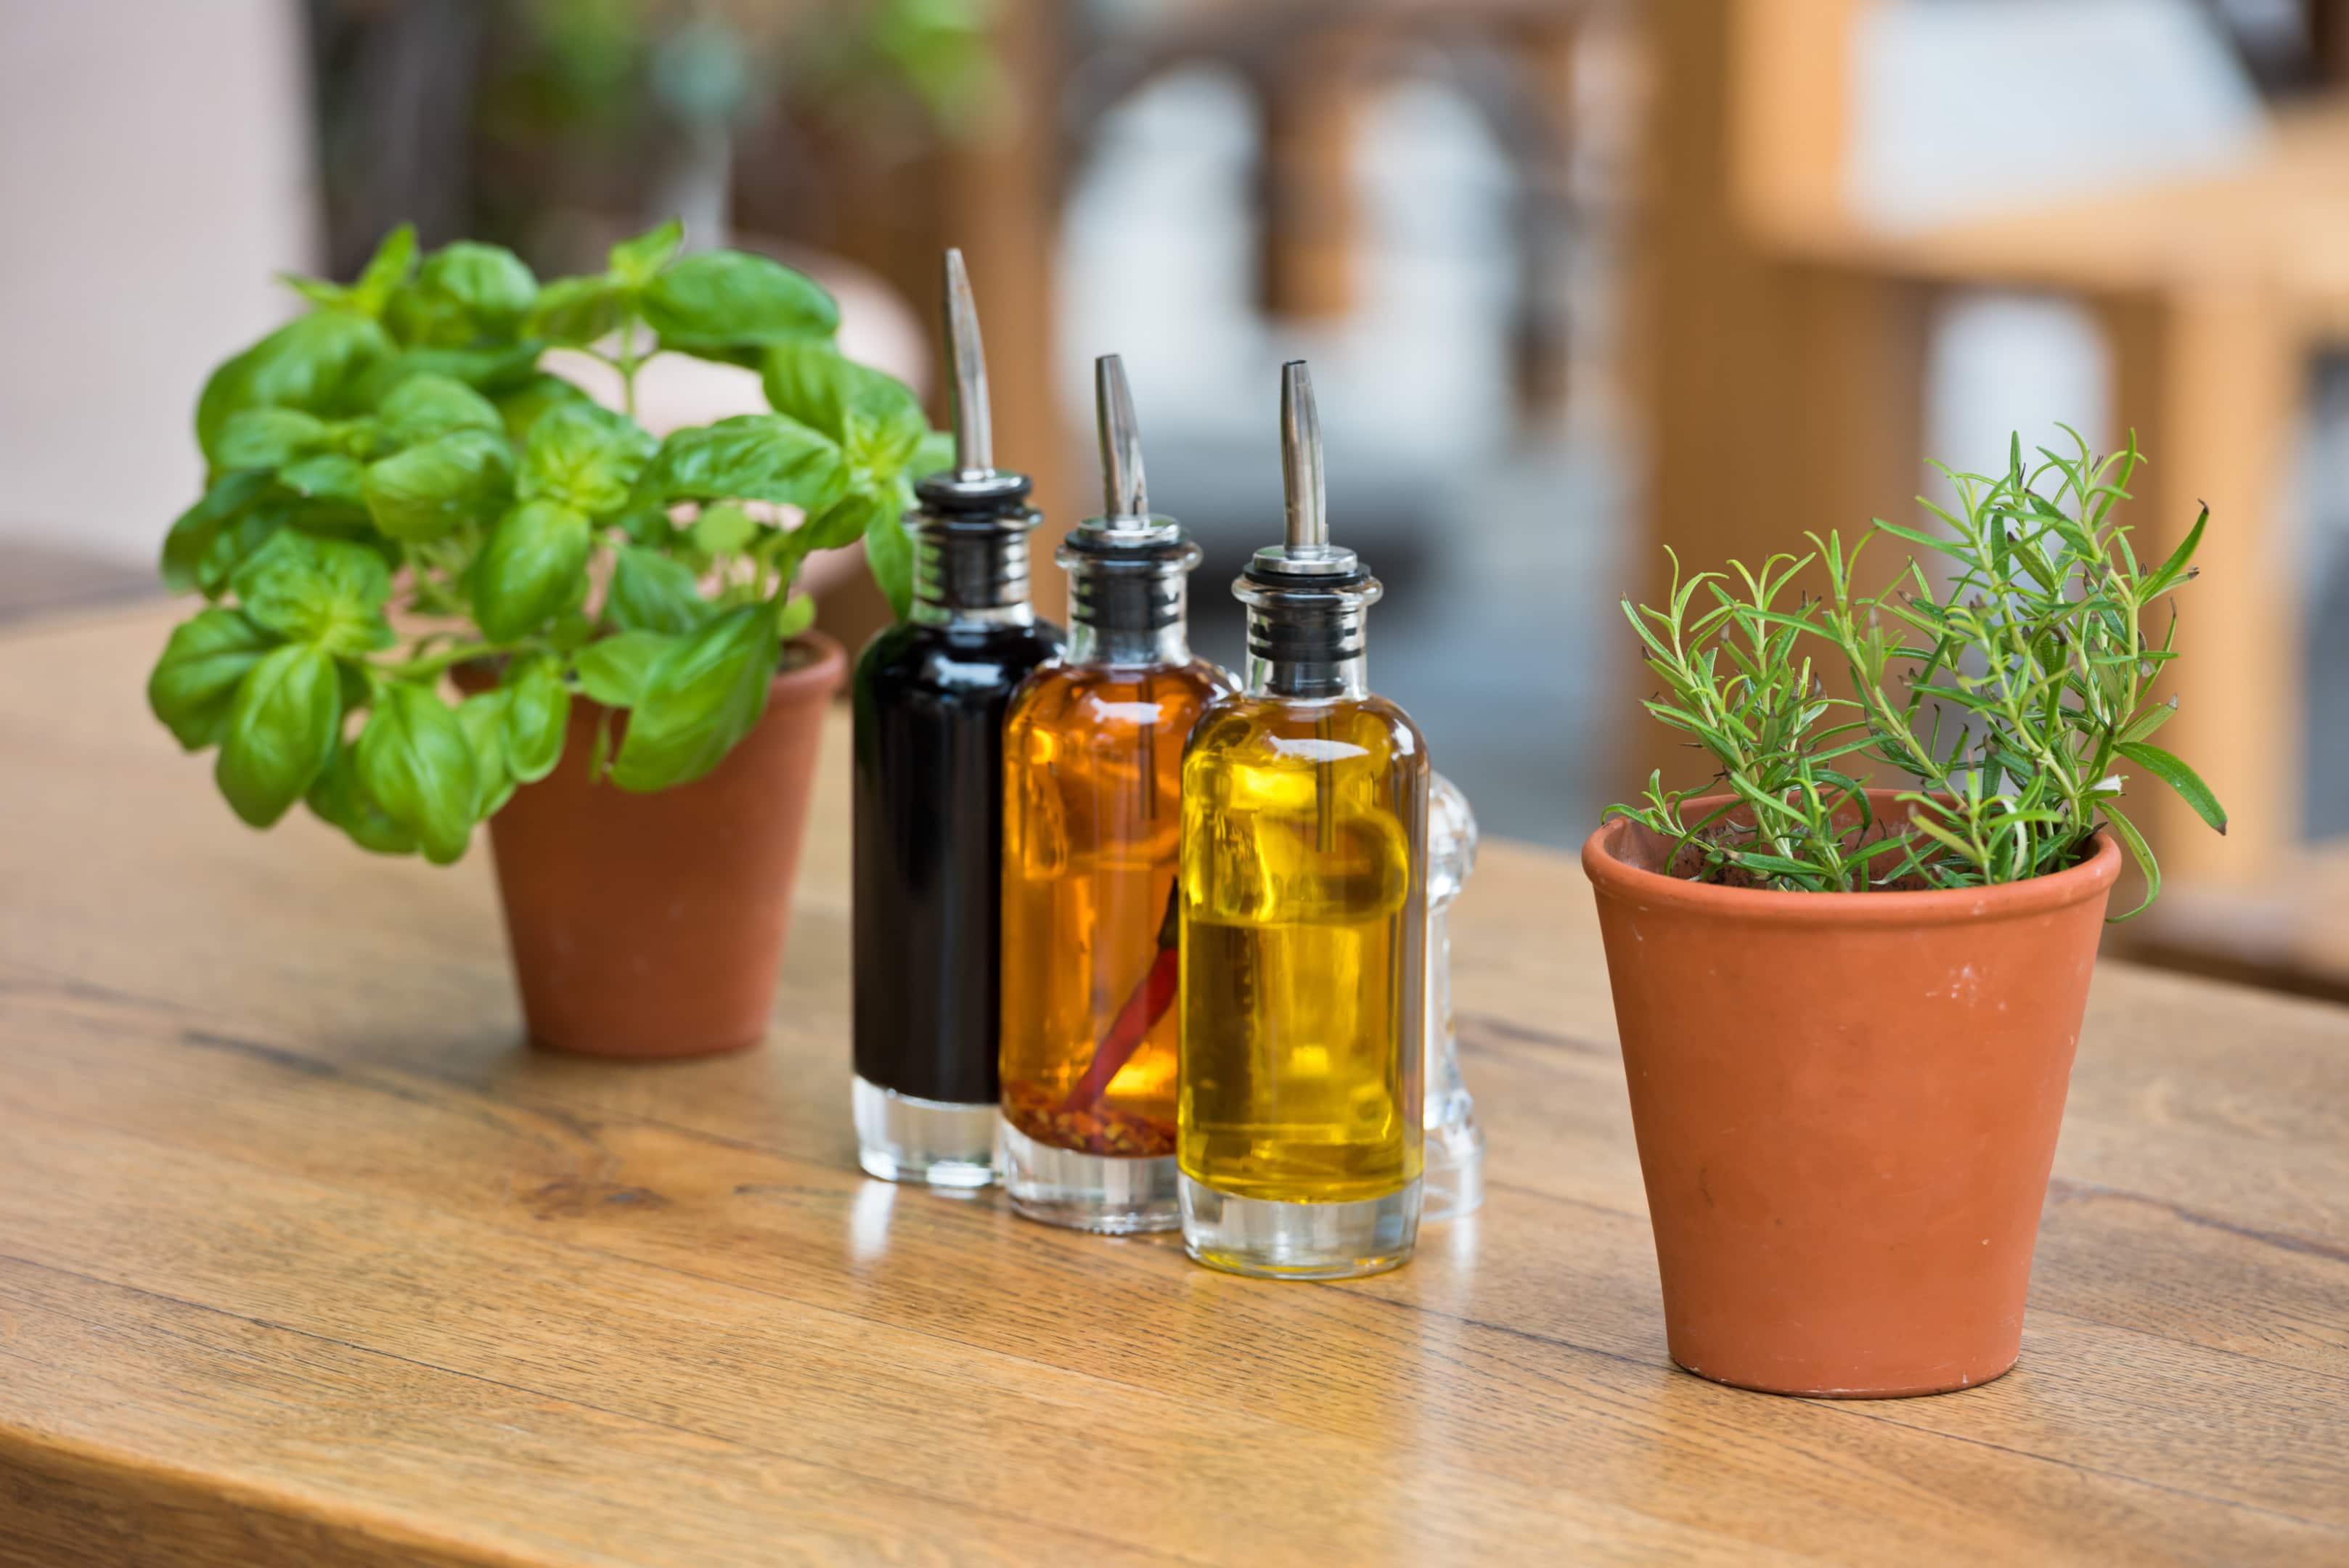 Herb vinegars with fresh herbs on wooden table